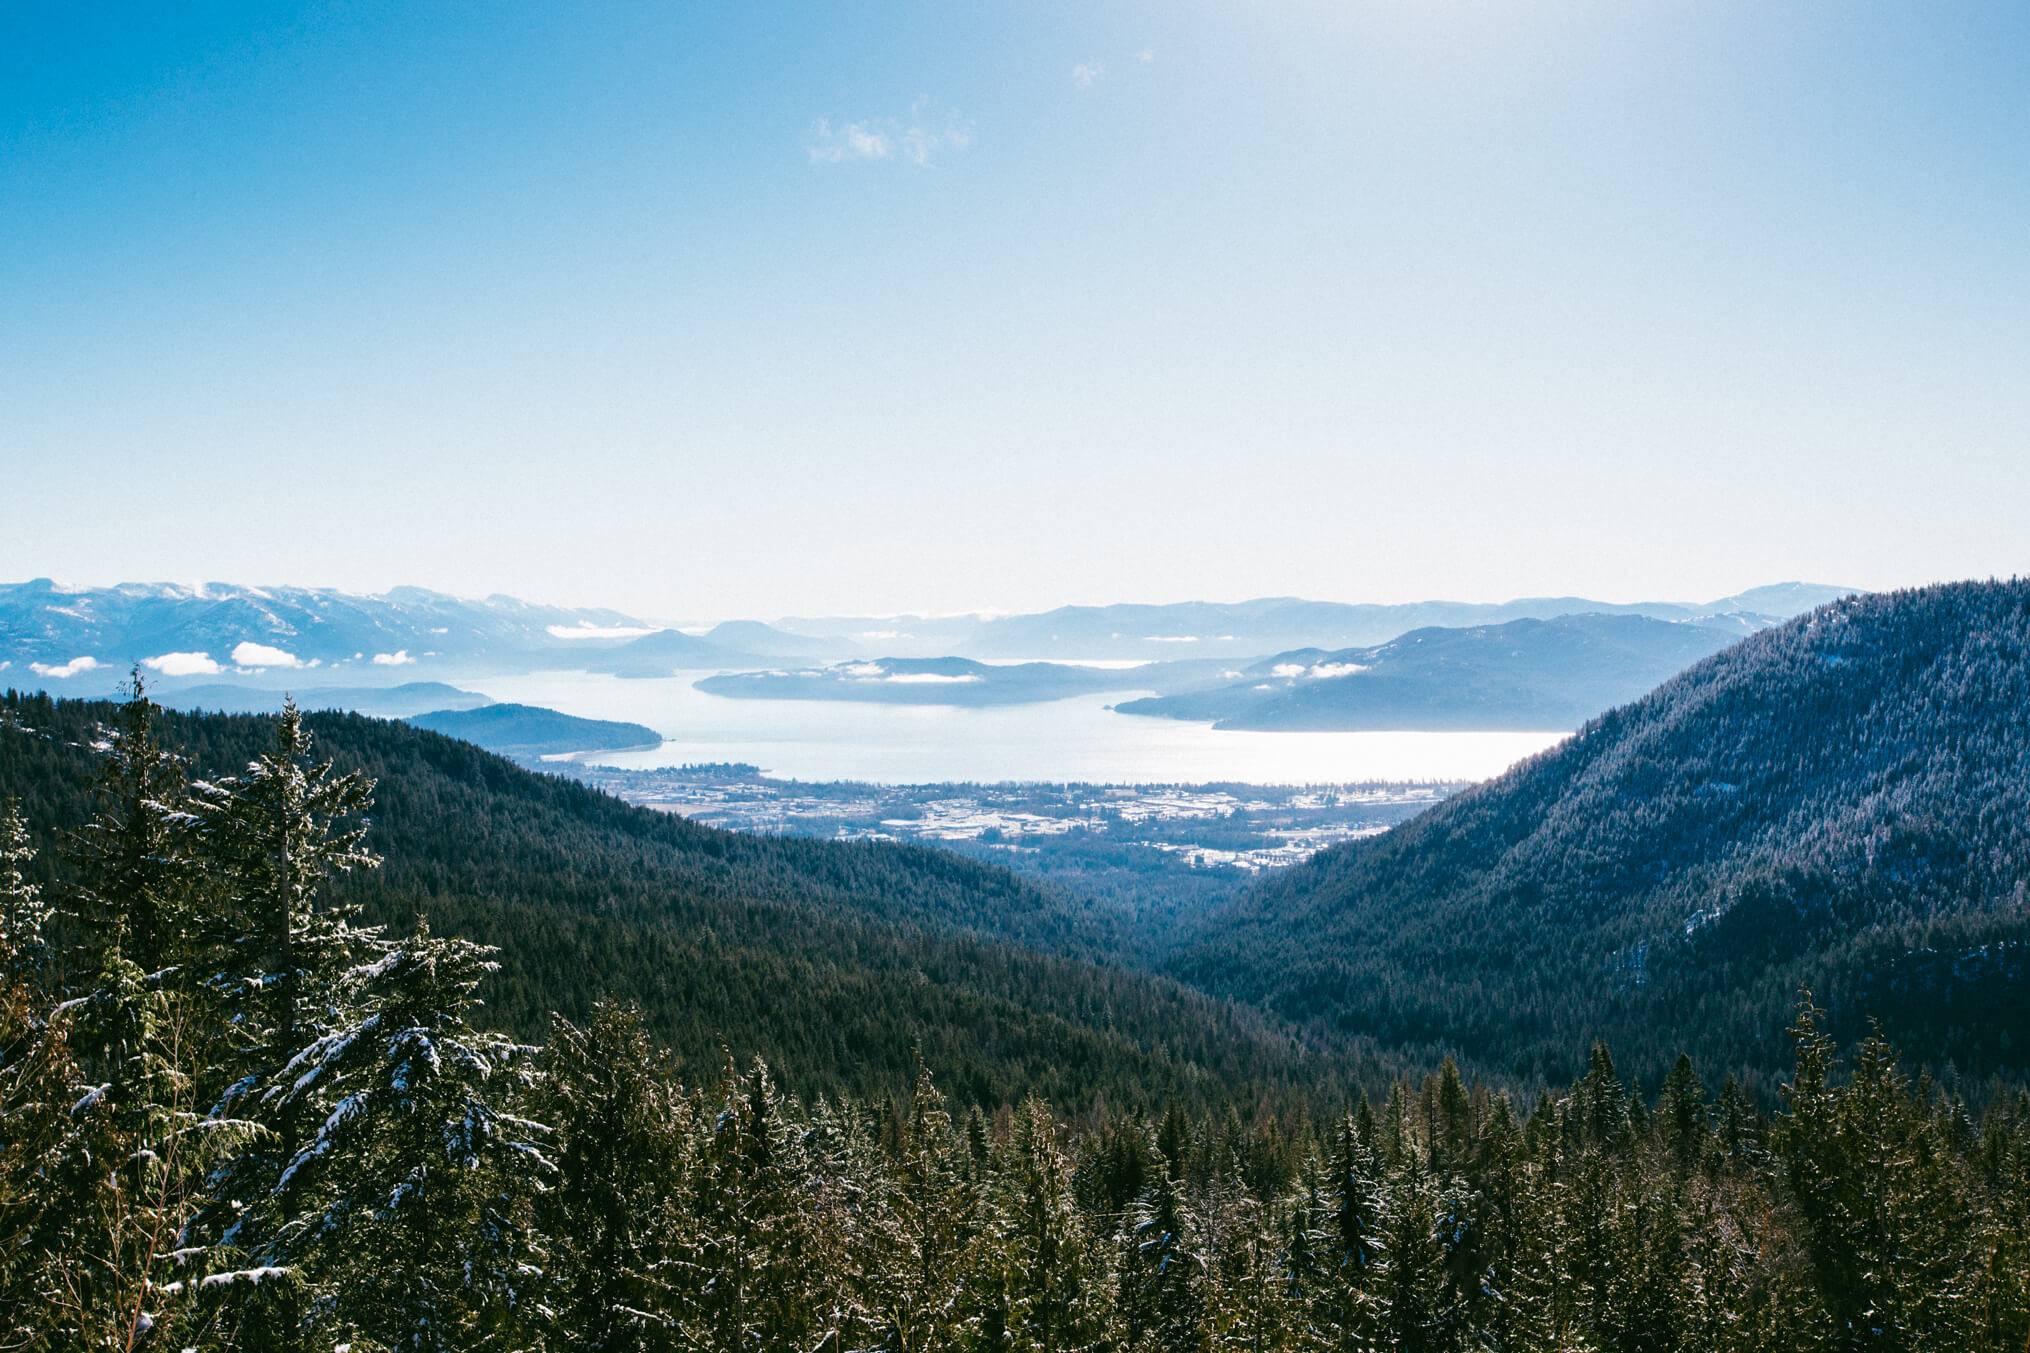 Lookout view of Lake Pend Oreille from the mountains.